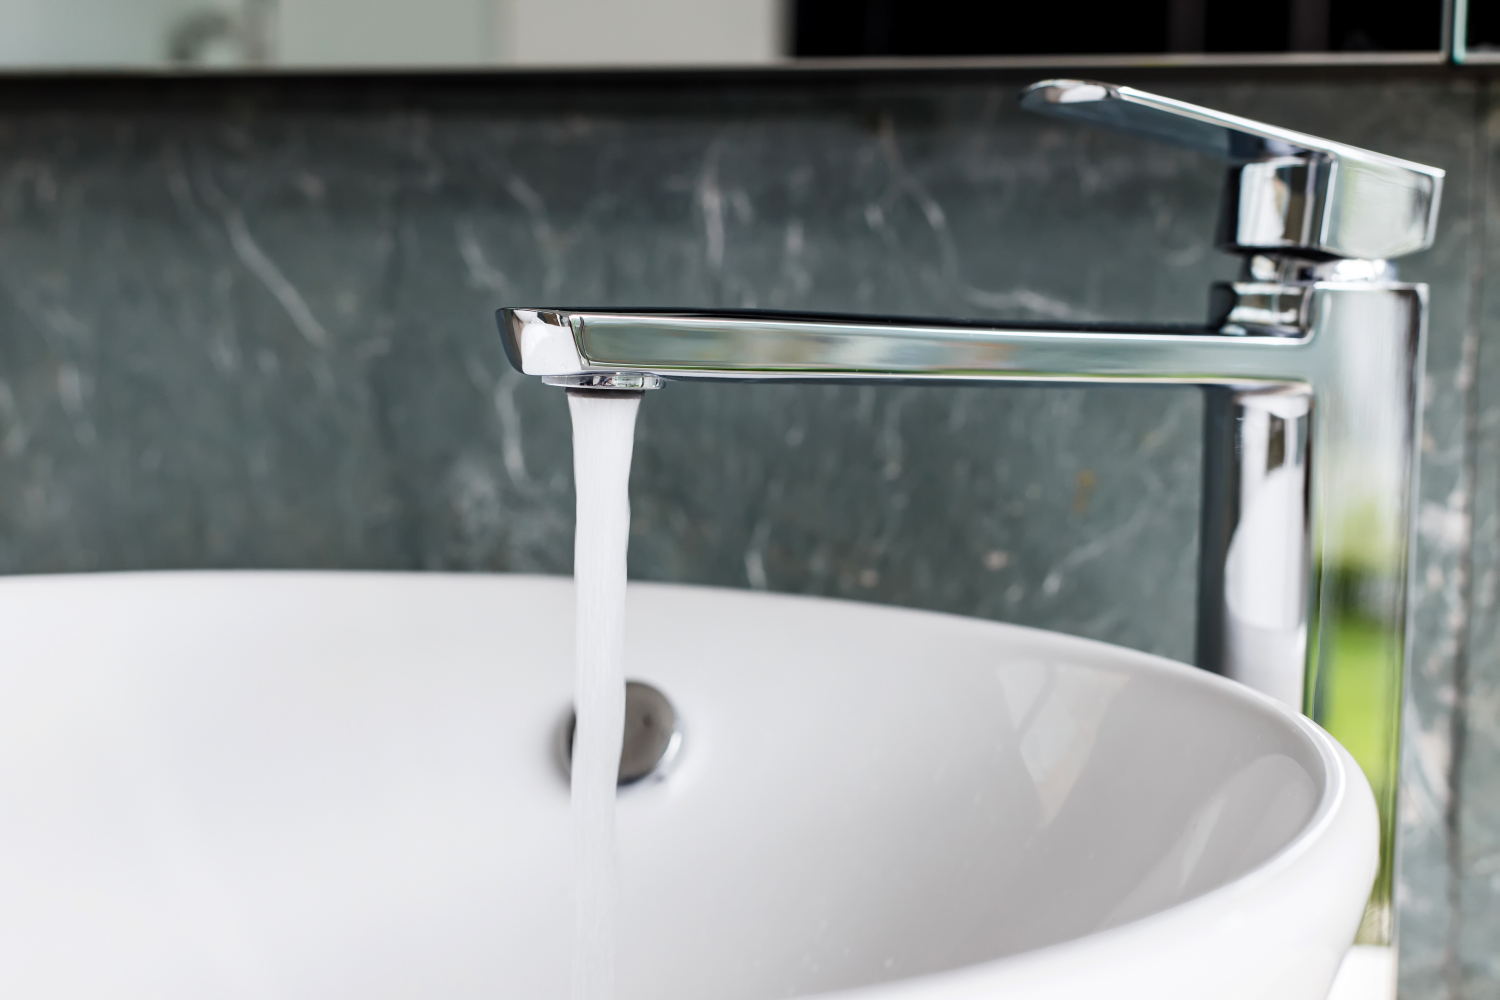 Things you need to consider before hiring a plumber to fix your tapware